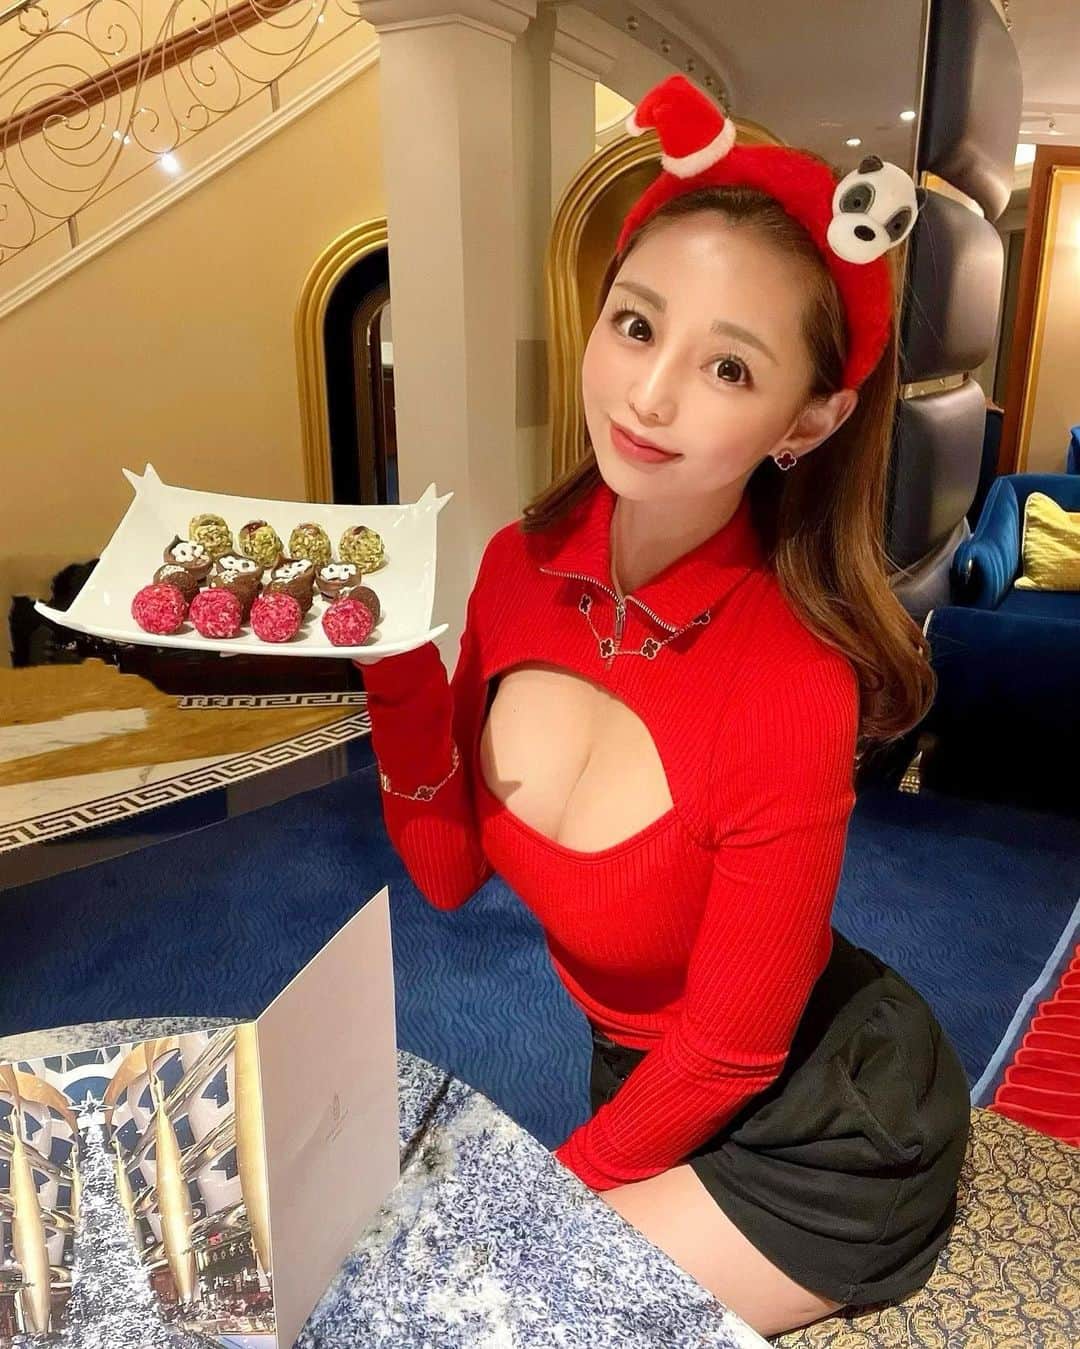 YURIのインスタグラム：「Happy Merry Christmas🎄🌟 I got a chocolate present from the Burj Al Arab🎅 Hope you have a wonderful day with your loved ones💝 、 、 、 メリークリスマス🎄 皆さんにとって素敵な日になりますように✨ 、 、 、 #merrychristmas #merryxmas #christmaschocolate #holidayseason #santaclaus #redmood #めりーくりすます #メリークリスマス #チョコレート #サンタさん #🎅」